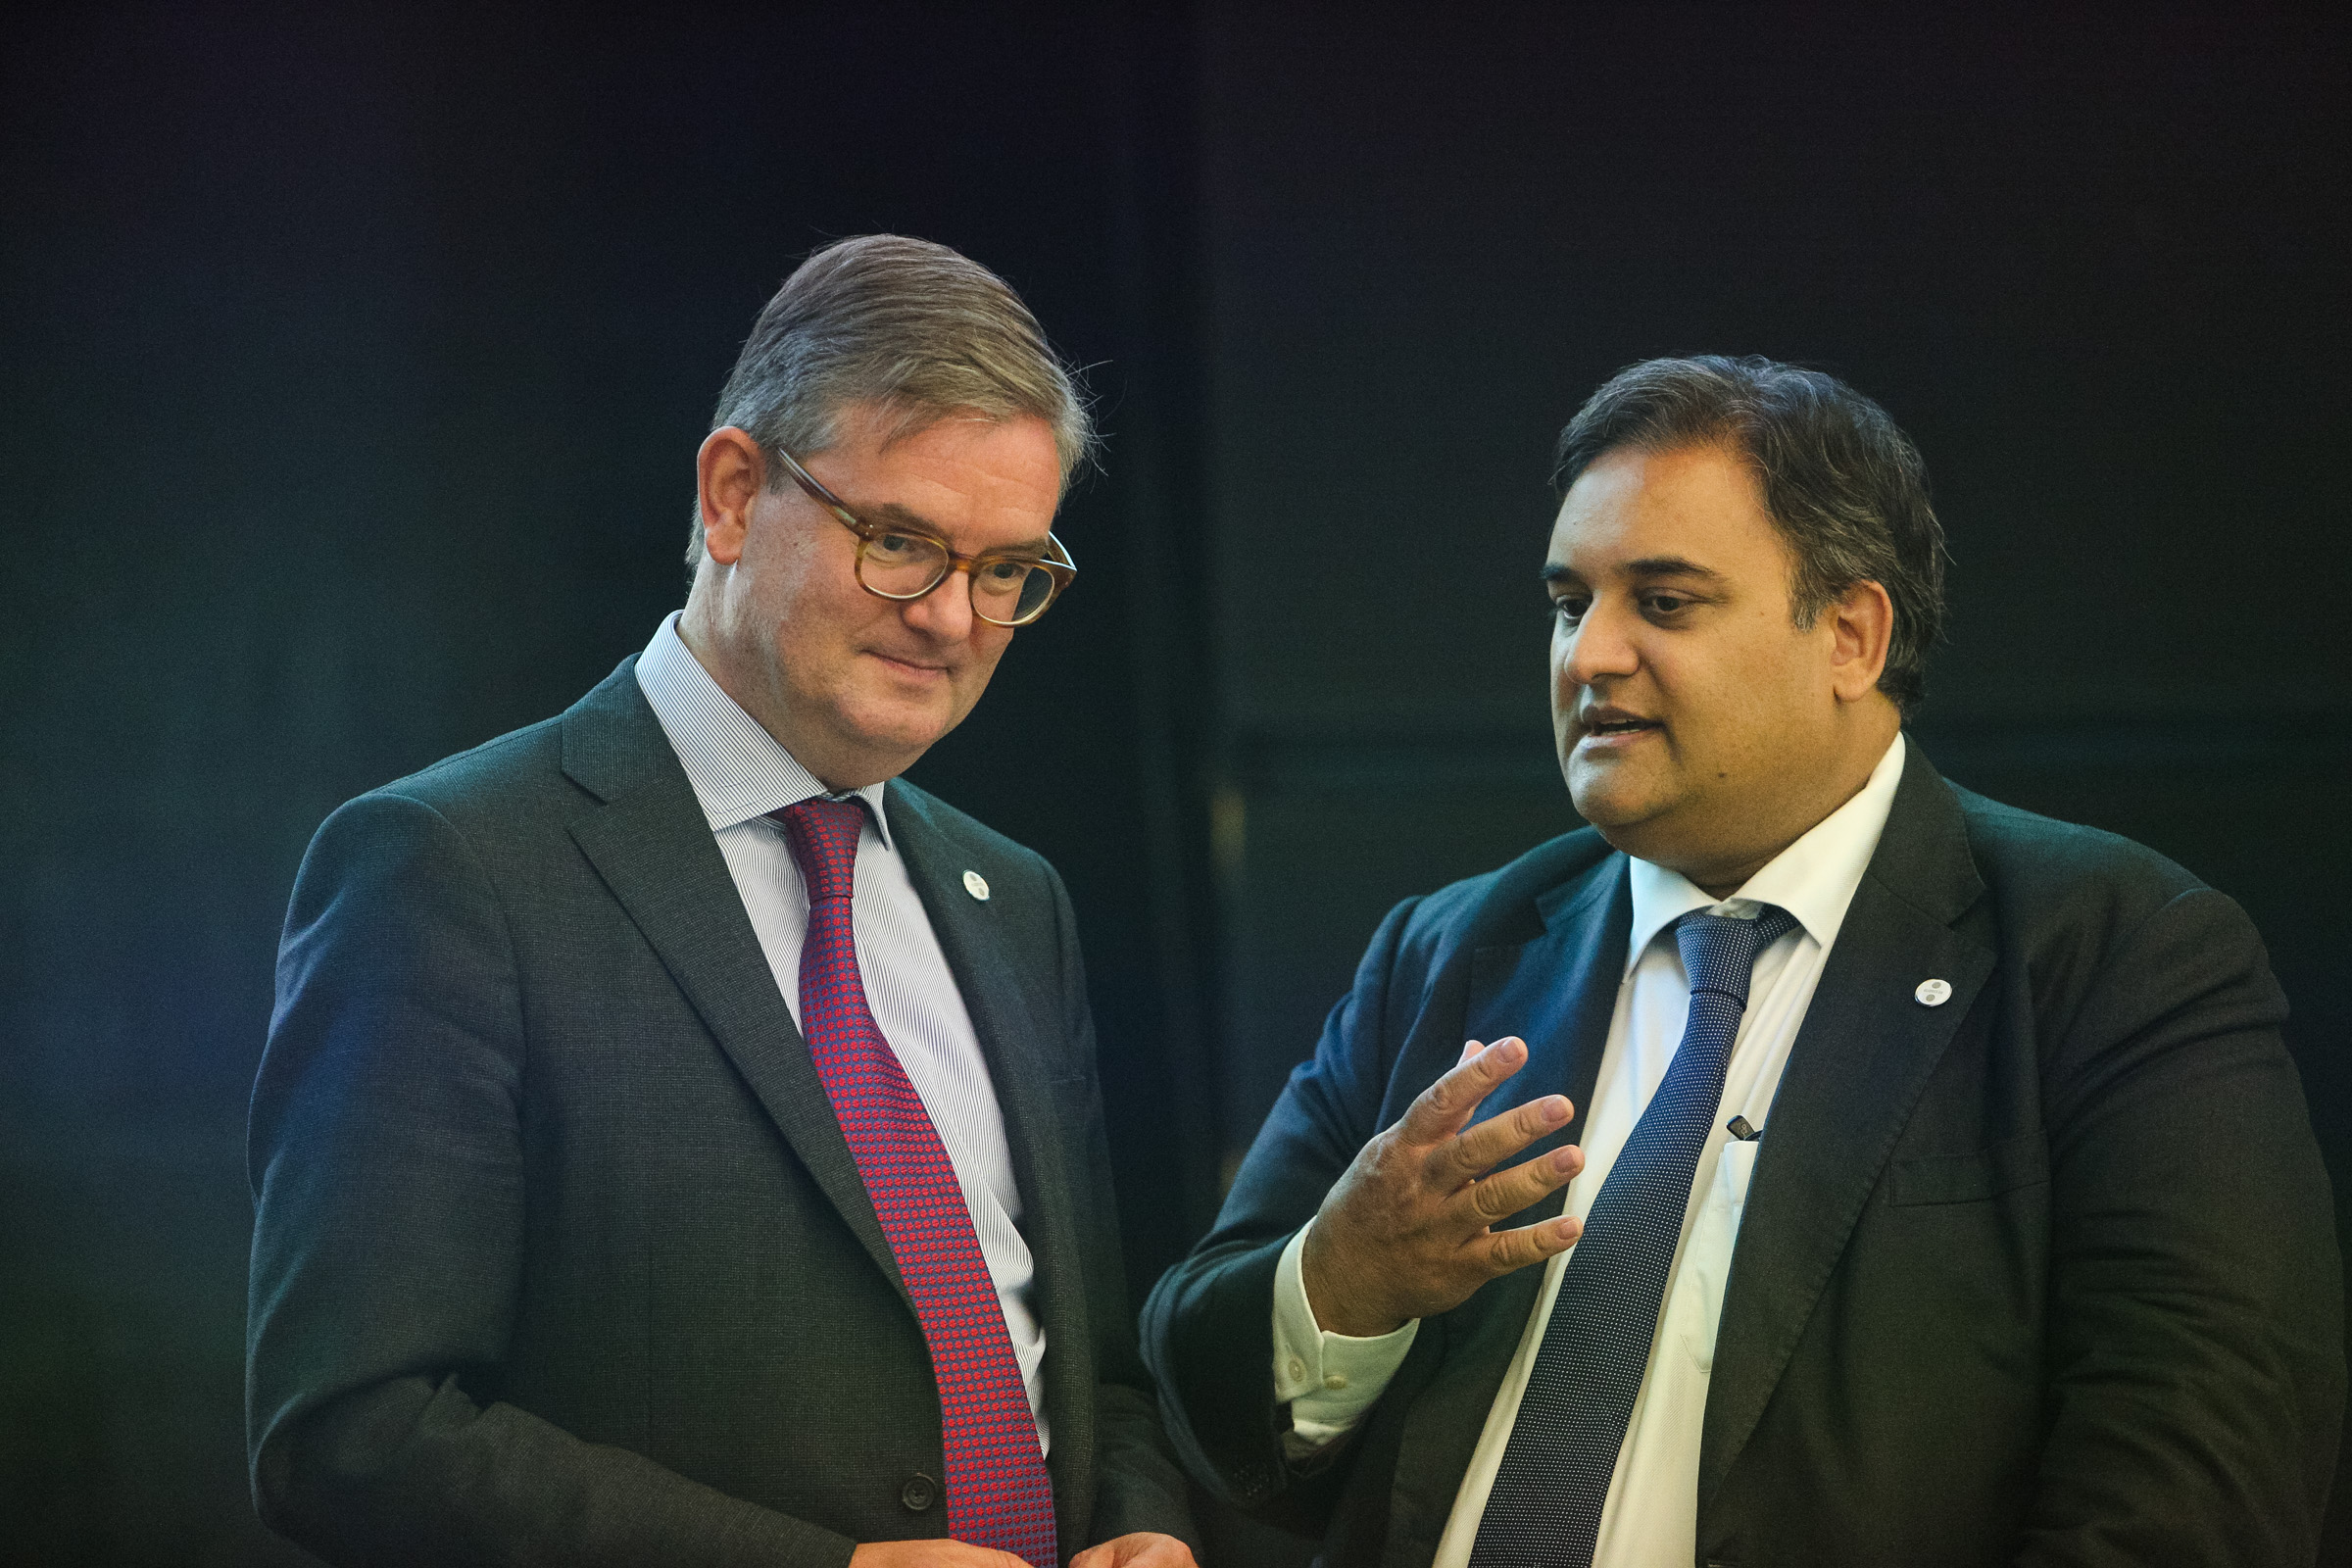 Informal meeting of justice and home affairs ministers Julian King and Claude Moraes (34946685773)